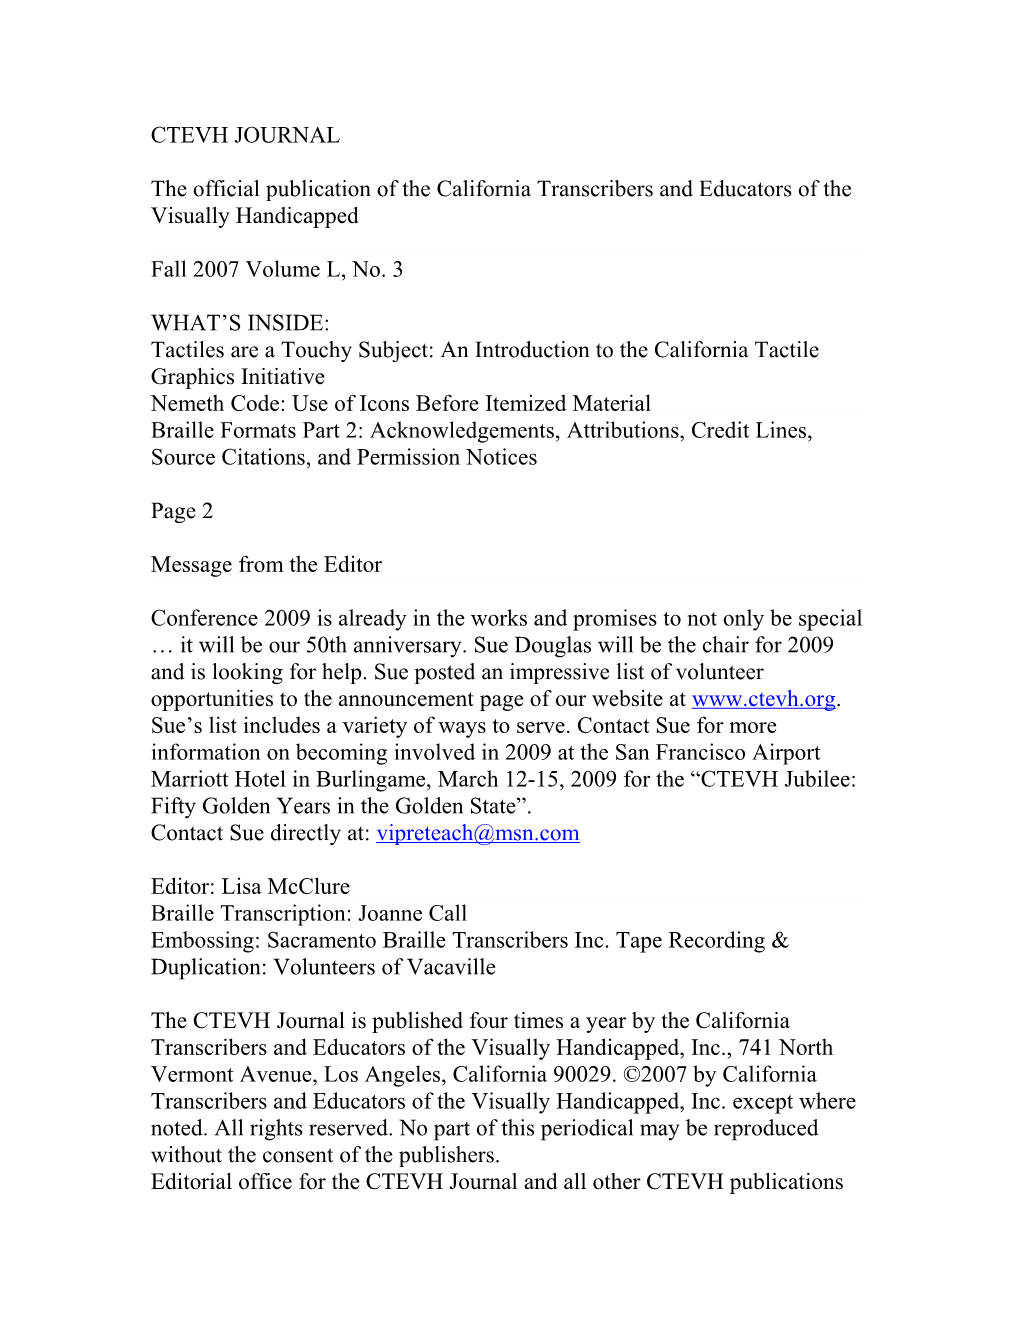 The Official Publication of Thecalifornia Transcribers and Educators of the Visually Handicapped